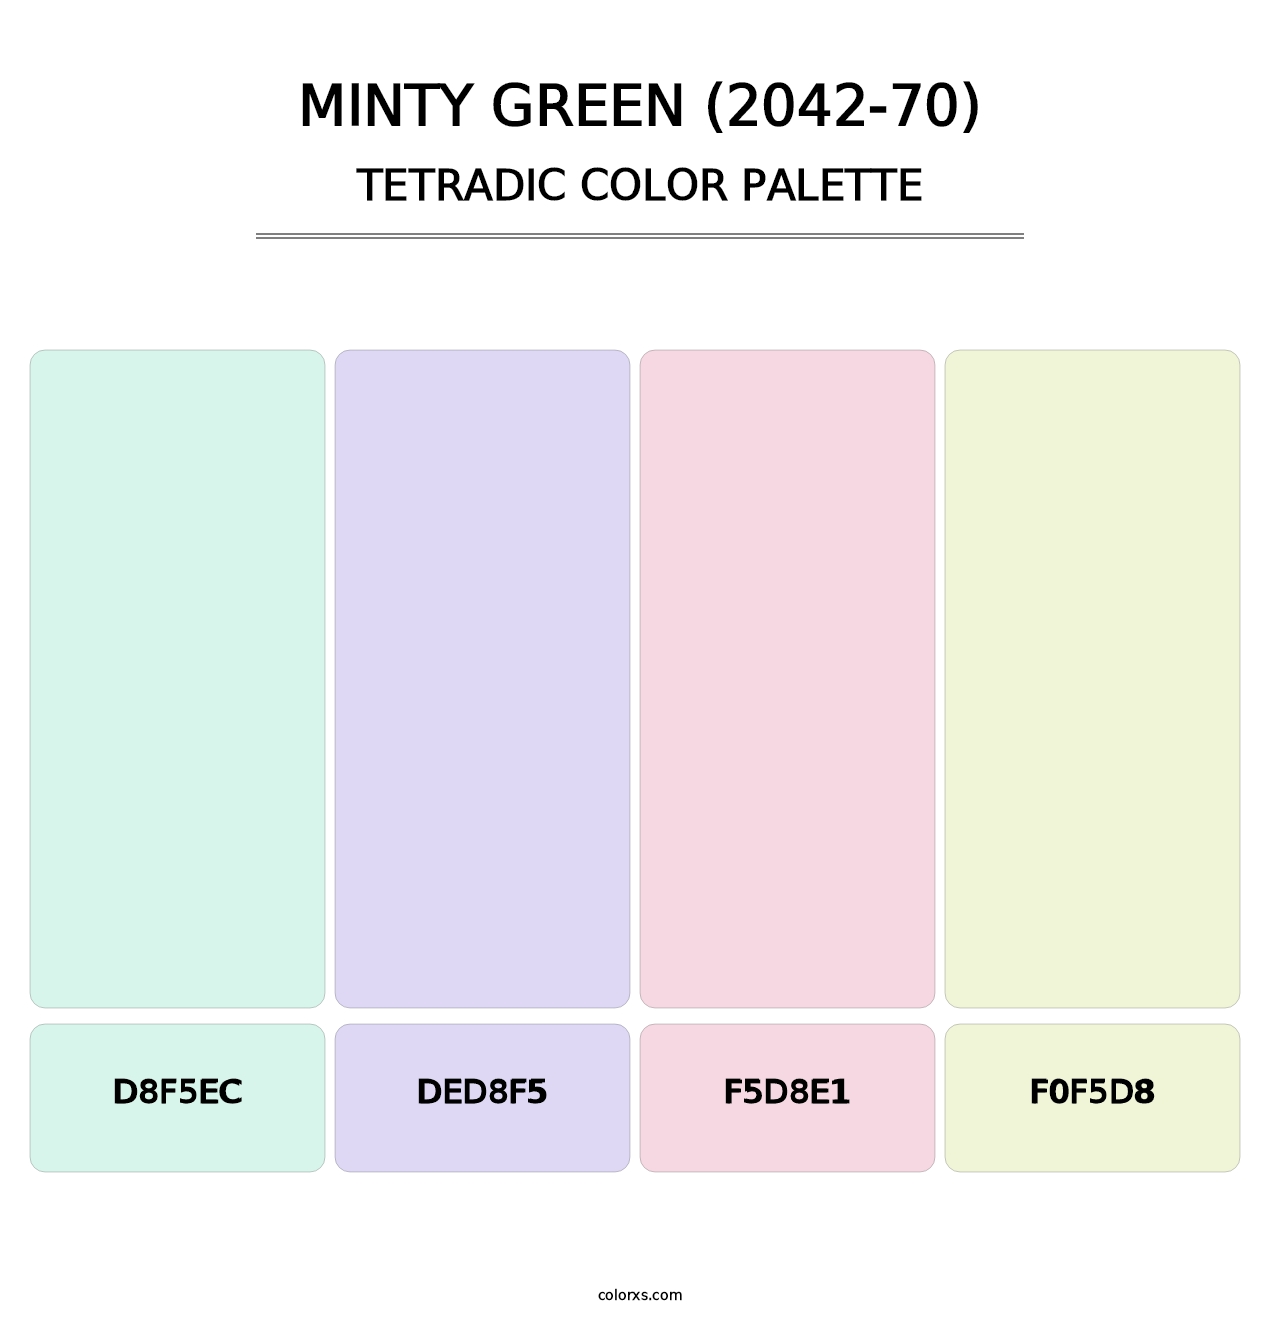 Minty Green (2042-70) - Tetradic Color Palette